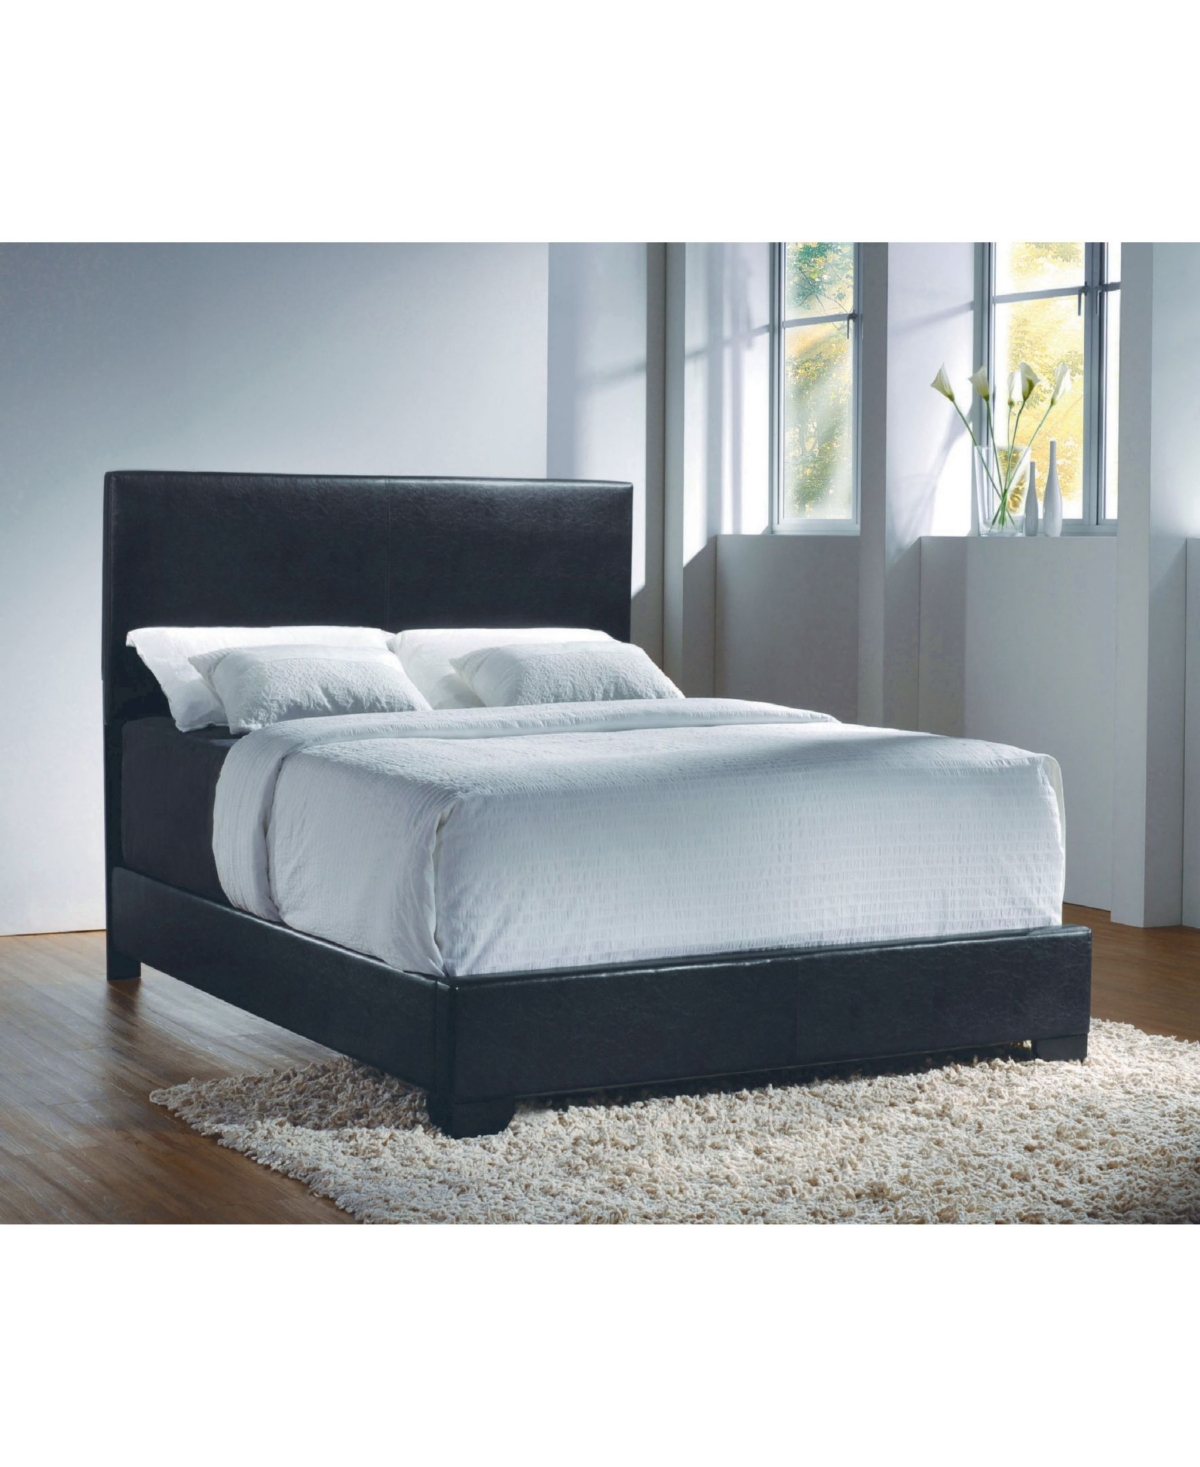 COASTER HOME FURNISHINGS WESTFIELD TWIN UPHOLSTERED LOW-PROFILE BED